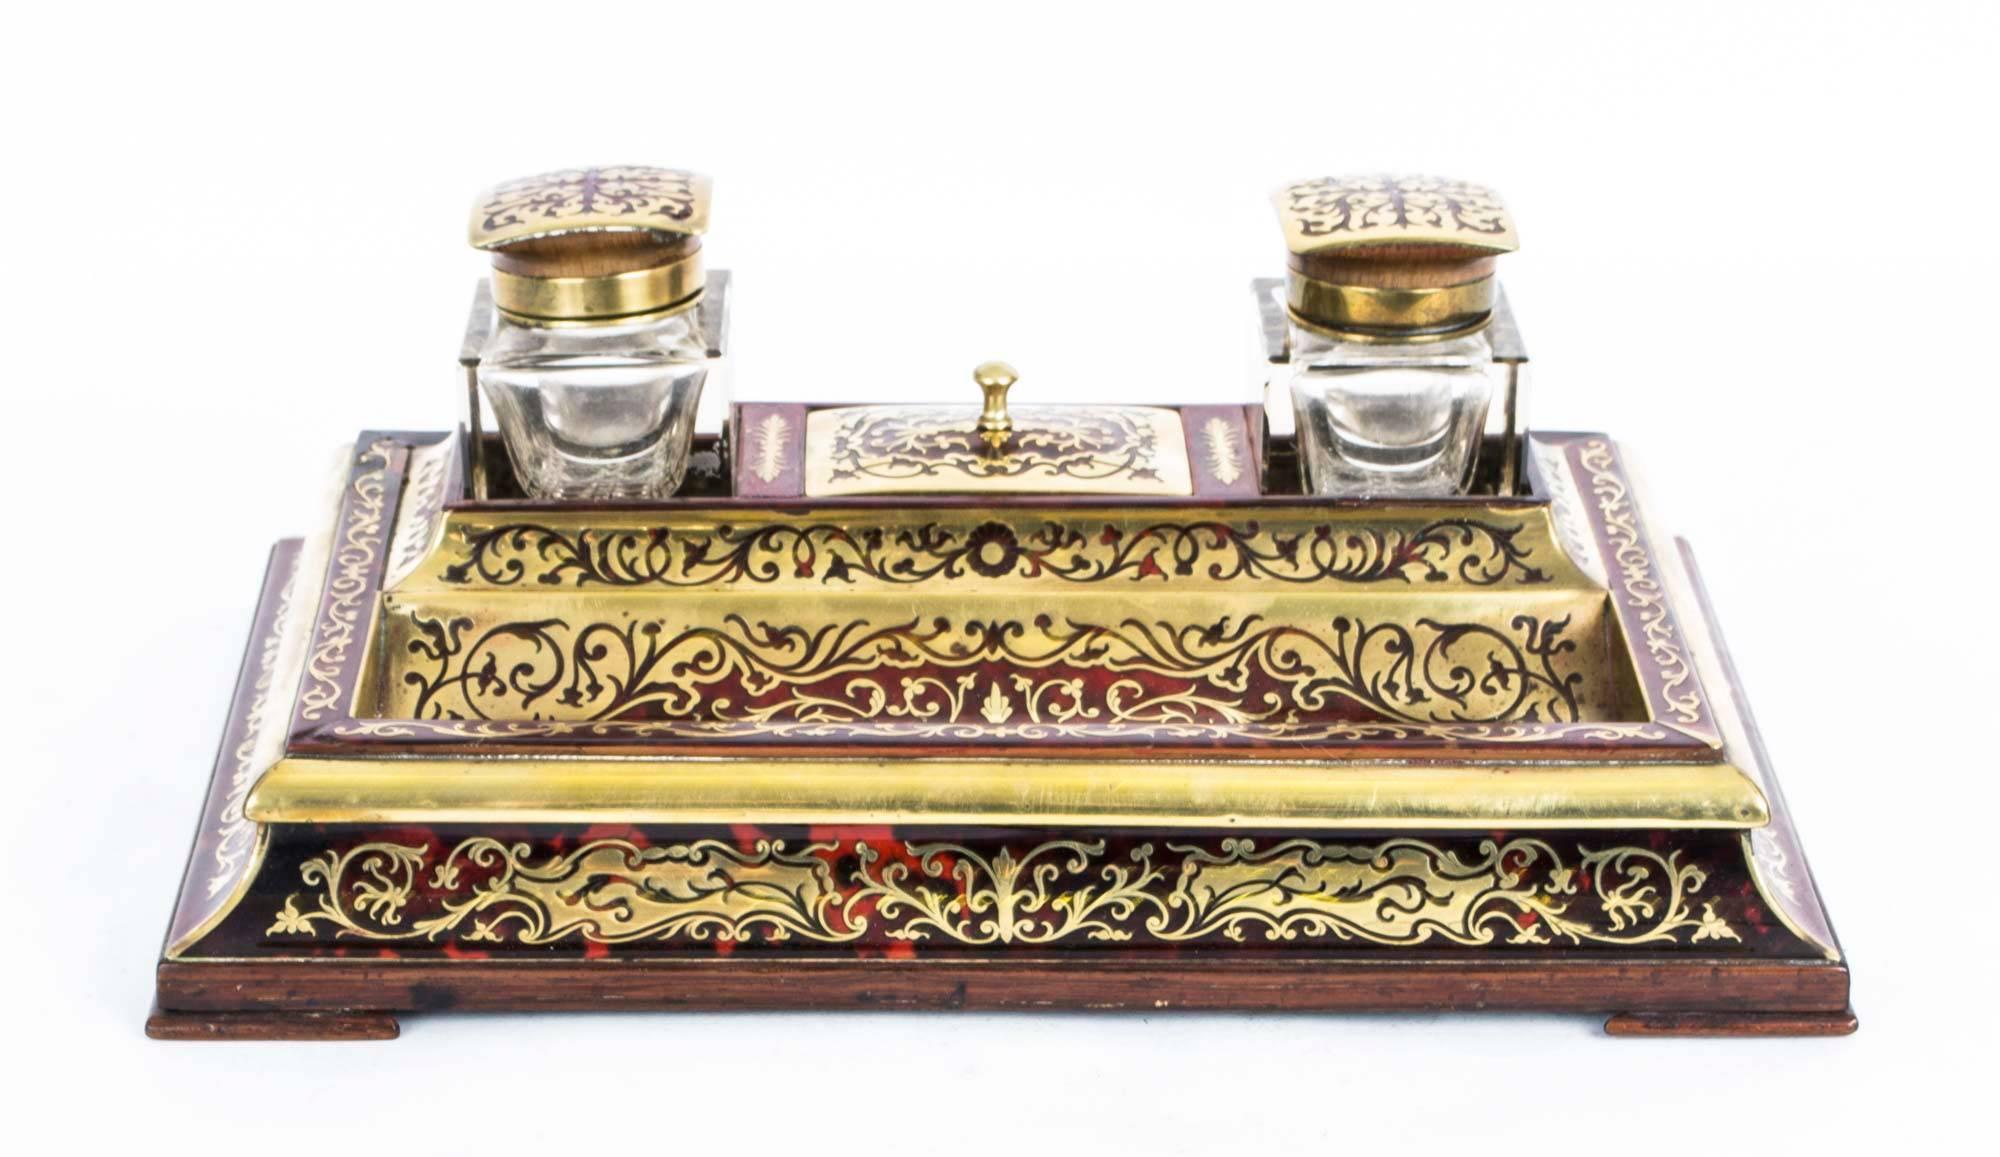 This is a lovely antique French ebonised cut brass Boulle work encrier, circa 1840 in date and retailed by the eminent retailer J.C. Vickery, of Regents Street, London.

The encrier comprises two glass inkwells and a lidded stamp box with a sunken